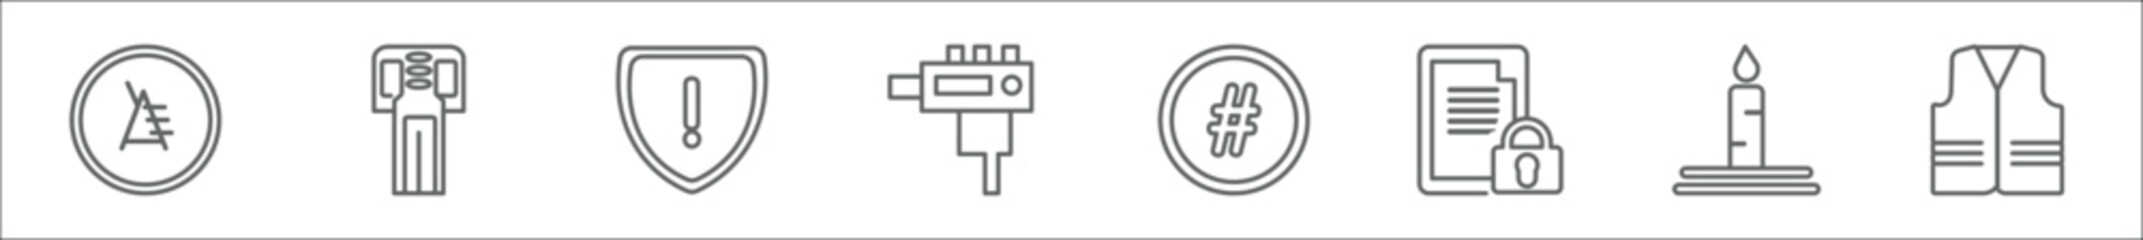 outline set of security line icons. linear vector icons such as lifeguard chair, race suit, security warning, uzi, hash, locked file, candles light, reflective vest